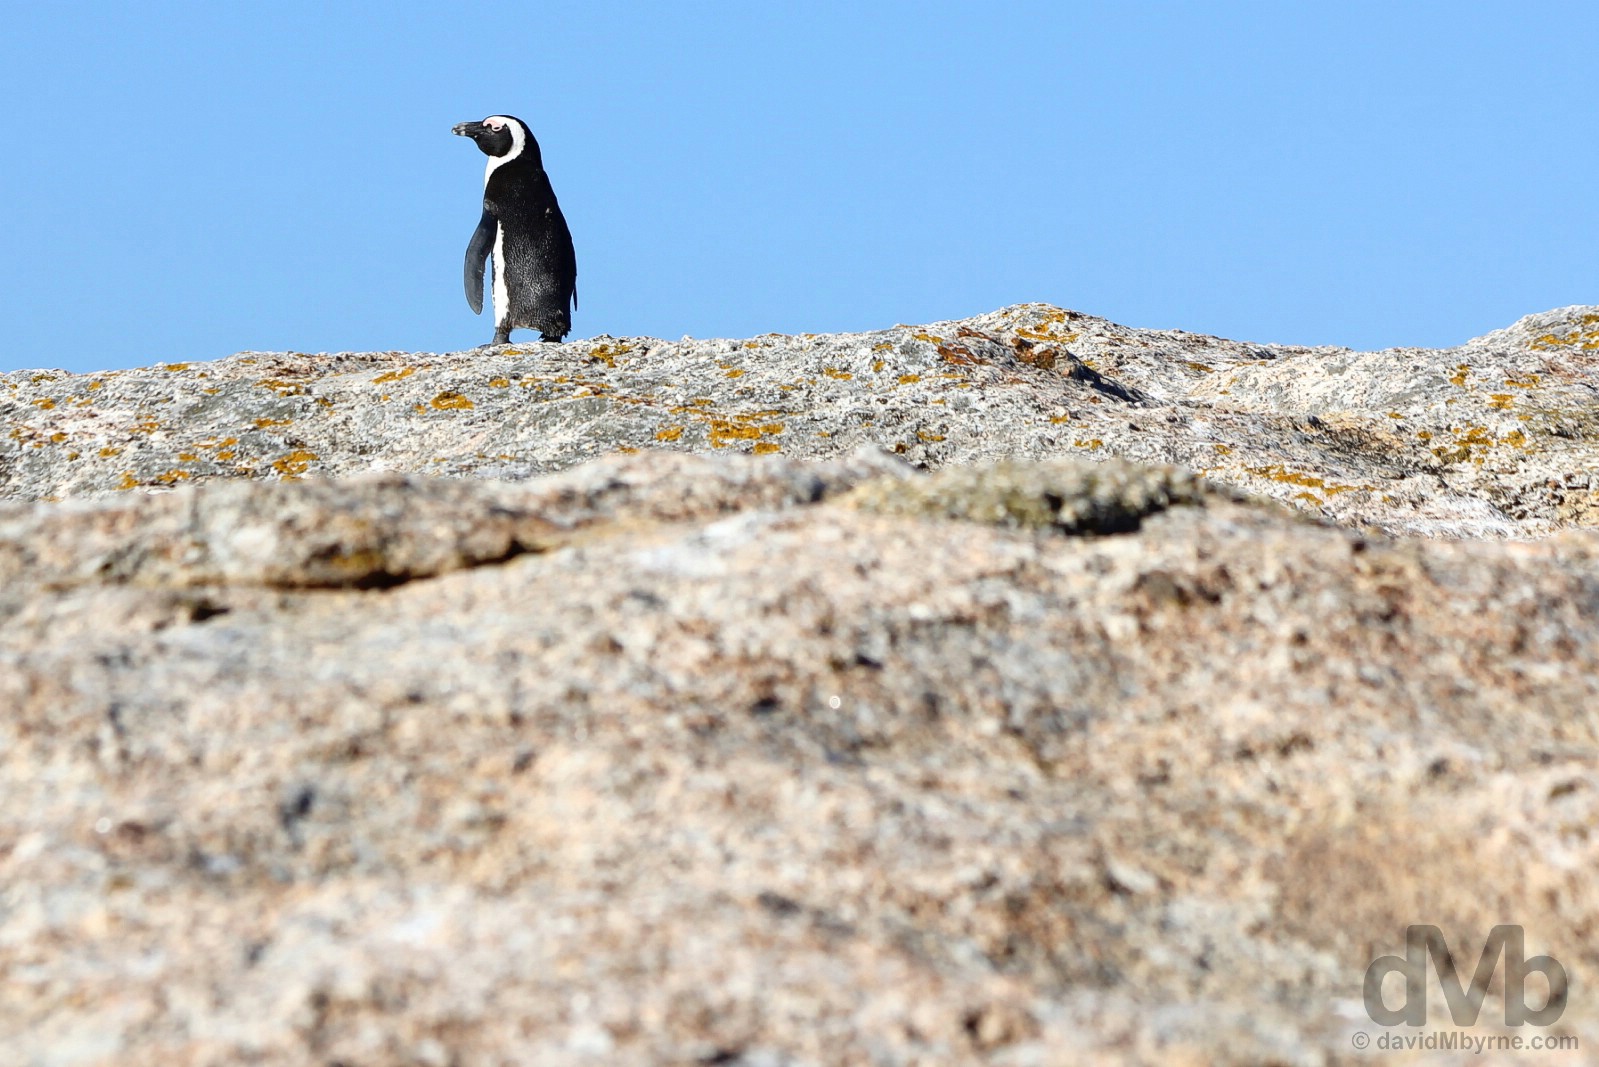 A lone African Penguin on the rocks of Boulders Beach on the shores of False Bay, Cape Peninsula, Western Cape, South Africa. February 17, 2017. 